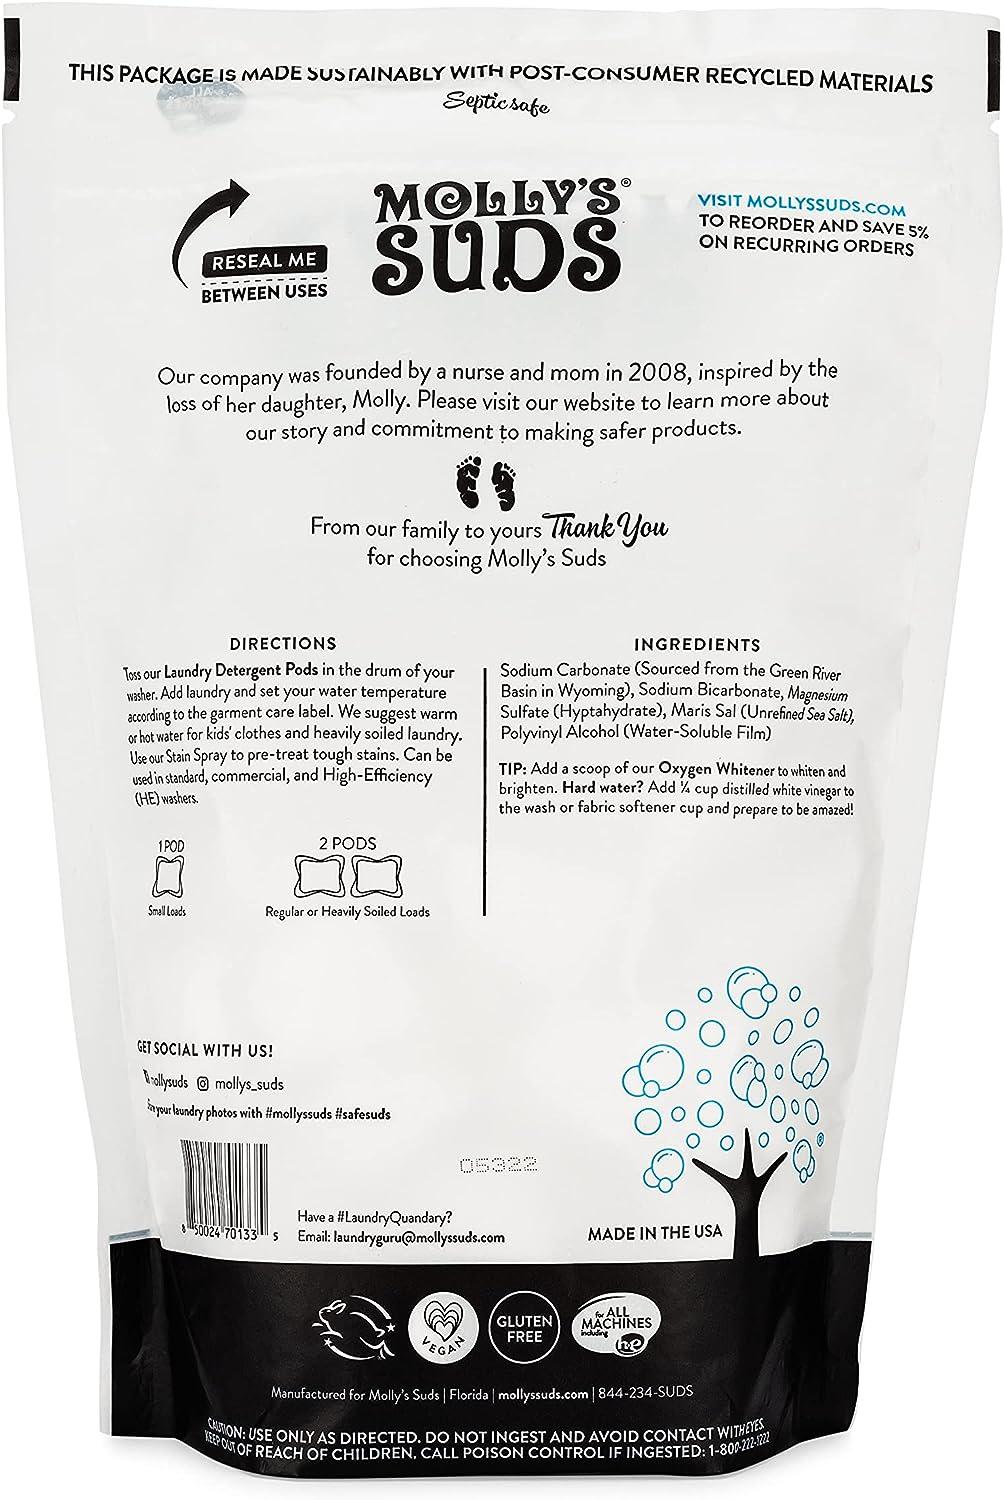  Molly's Suds Original Laundry Detergent Powder, Natural  Laundry Detergent Powder for Sensitive Skin, Earth-Derived Ingredients,  Stain Fighting